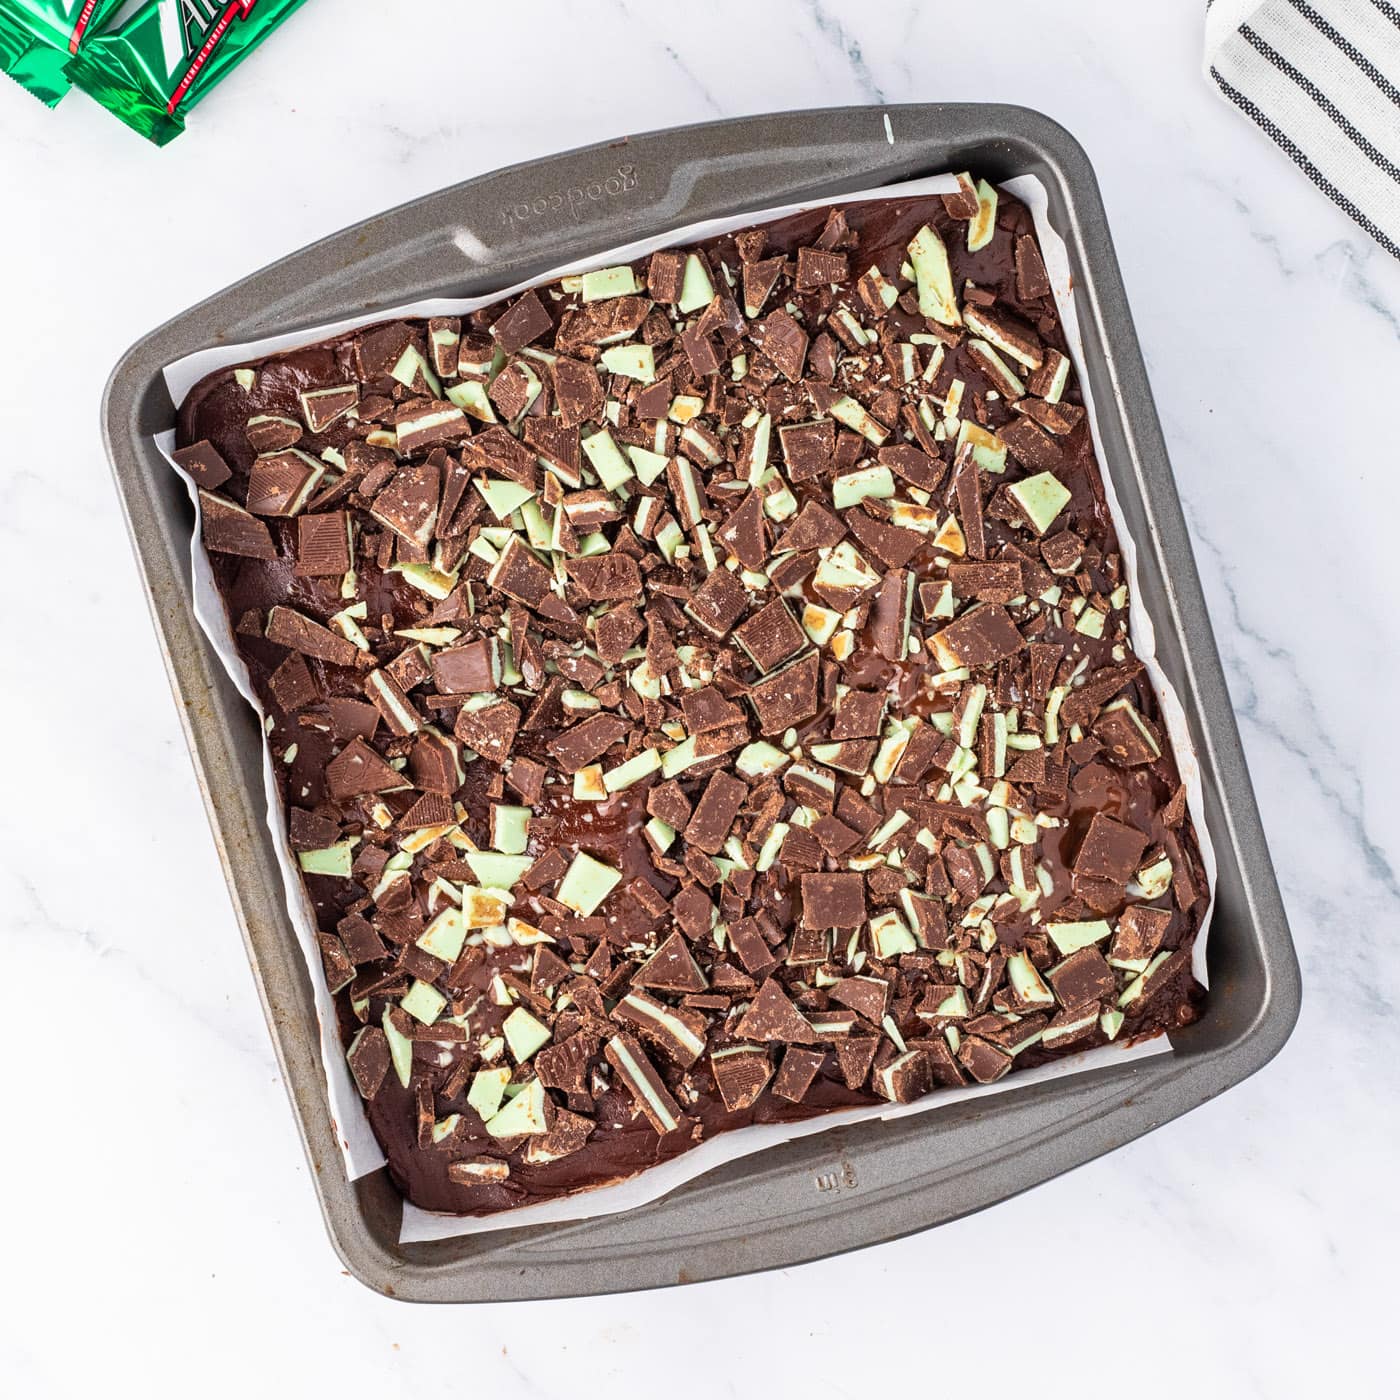 chopped chocolate mints on top of Andes mint fudge